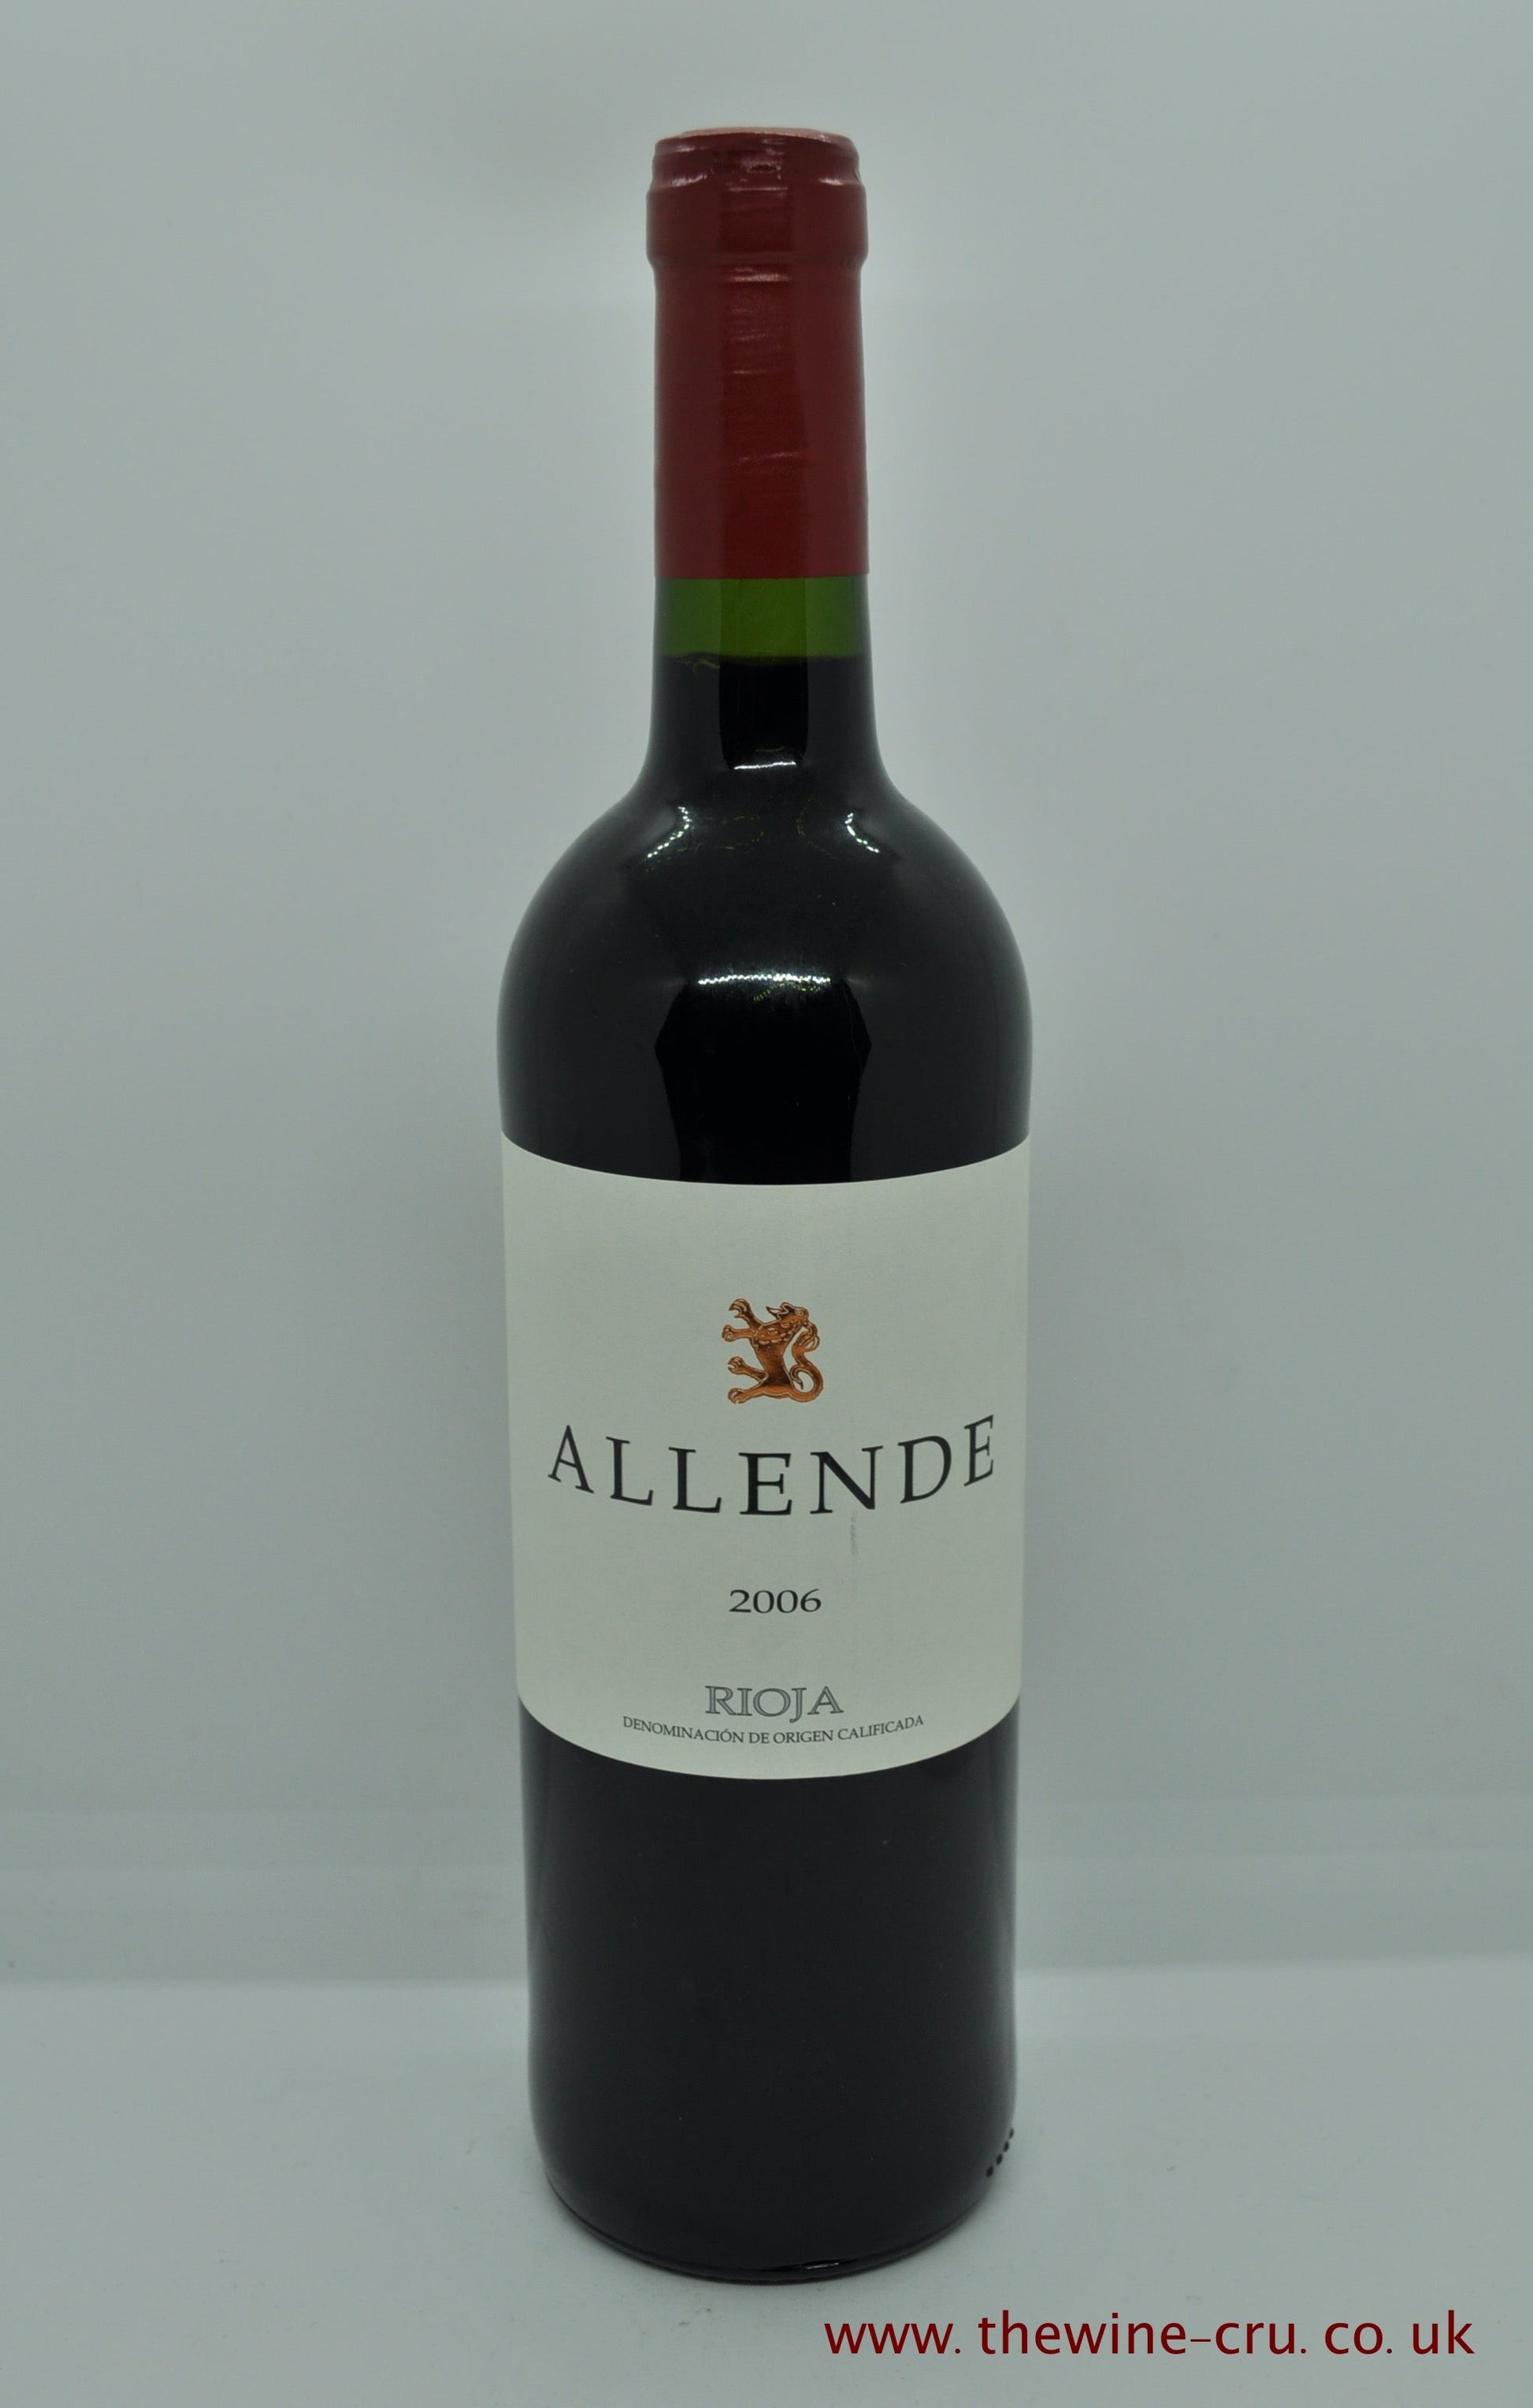 2006 vintage red wine. Allende Rioja 2006. Spain. Immediate delivery. Free local delivery. Gift wrapping available.